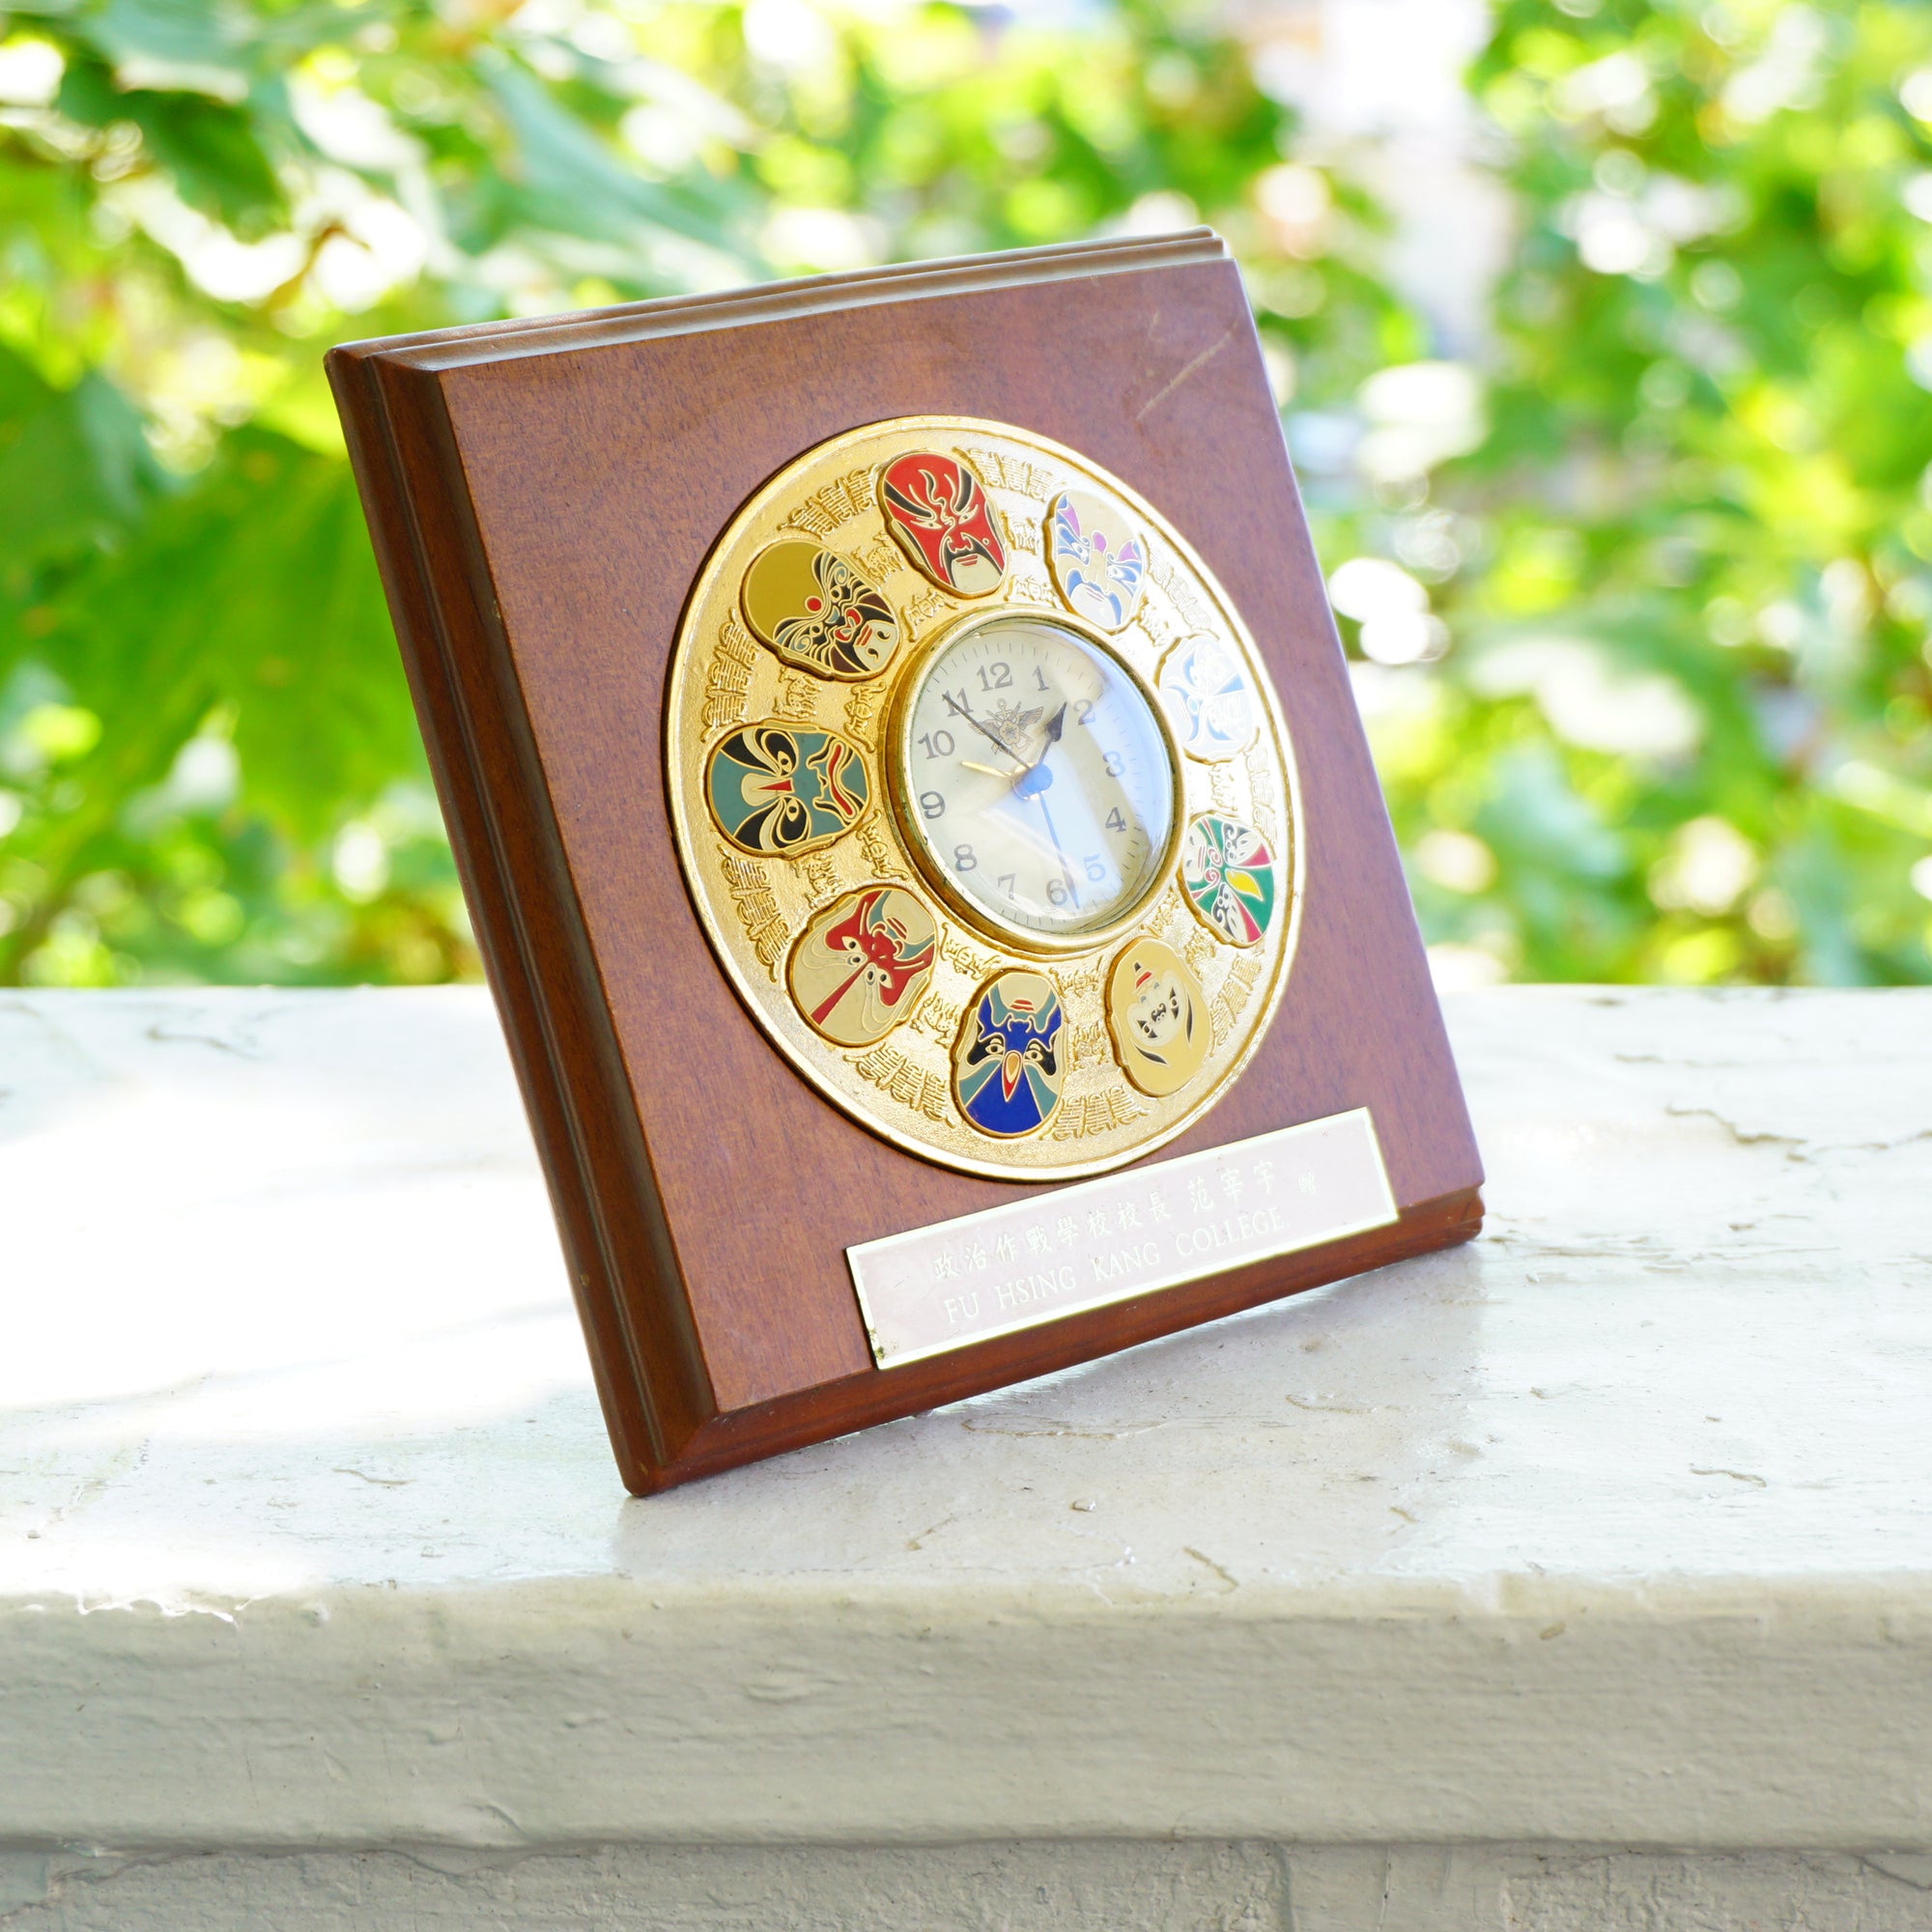 Vintage Fu Hsing Kang College Gold Tone 9 Mask Clock with a Wooden Frame.